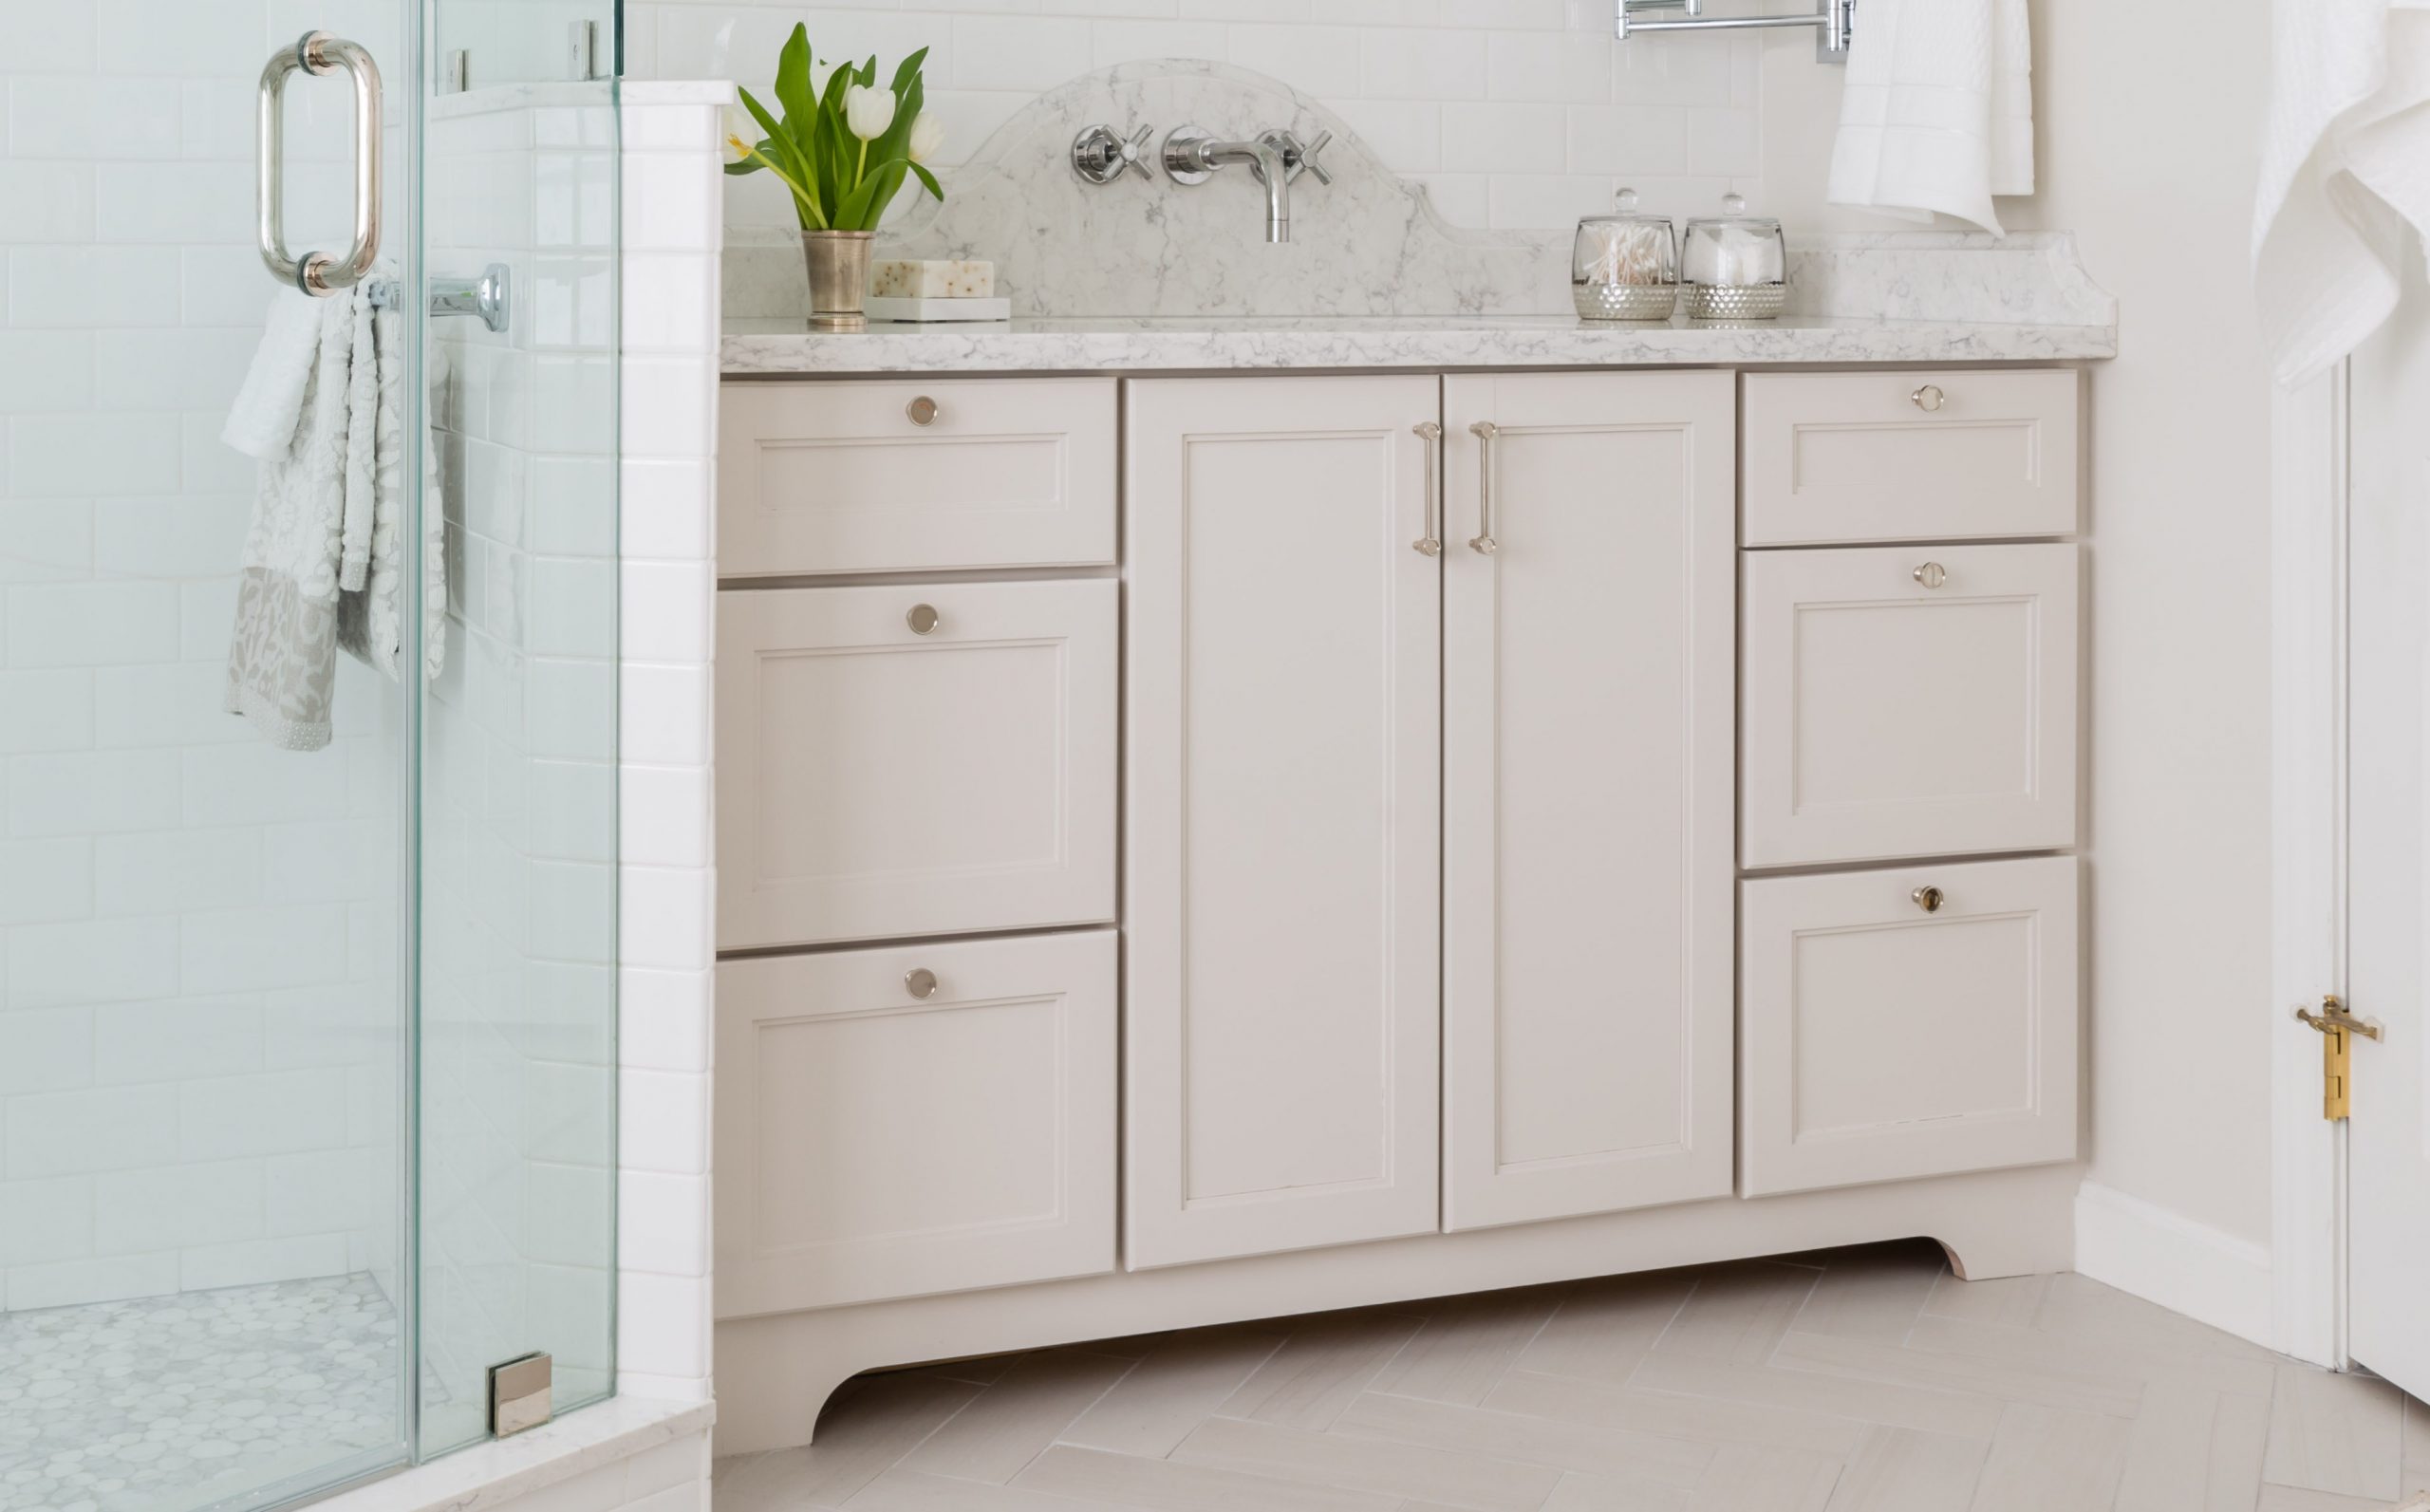 Which Vanity Works with Your Bathroom?